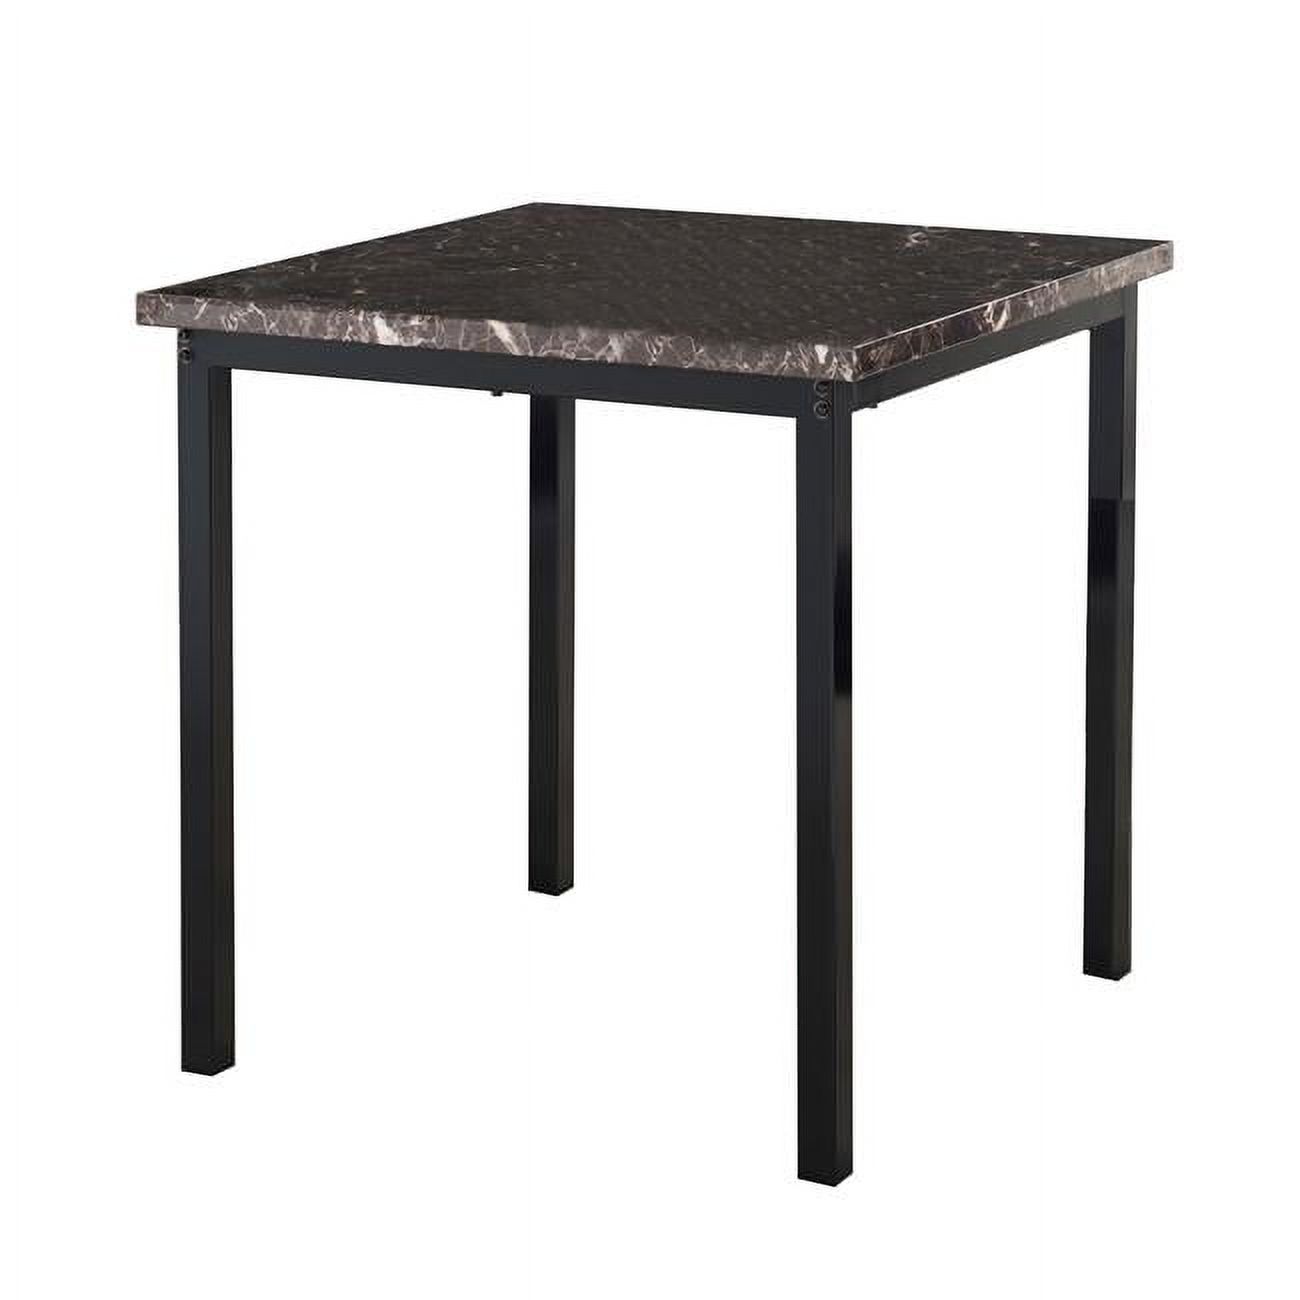 KB D107-4 30 x 30 x 30 in. Dining Table, Black & Marble - image 1 of 3